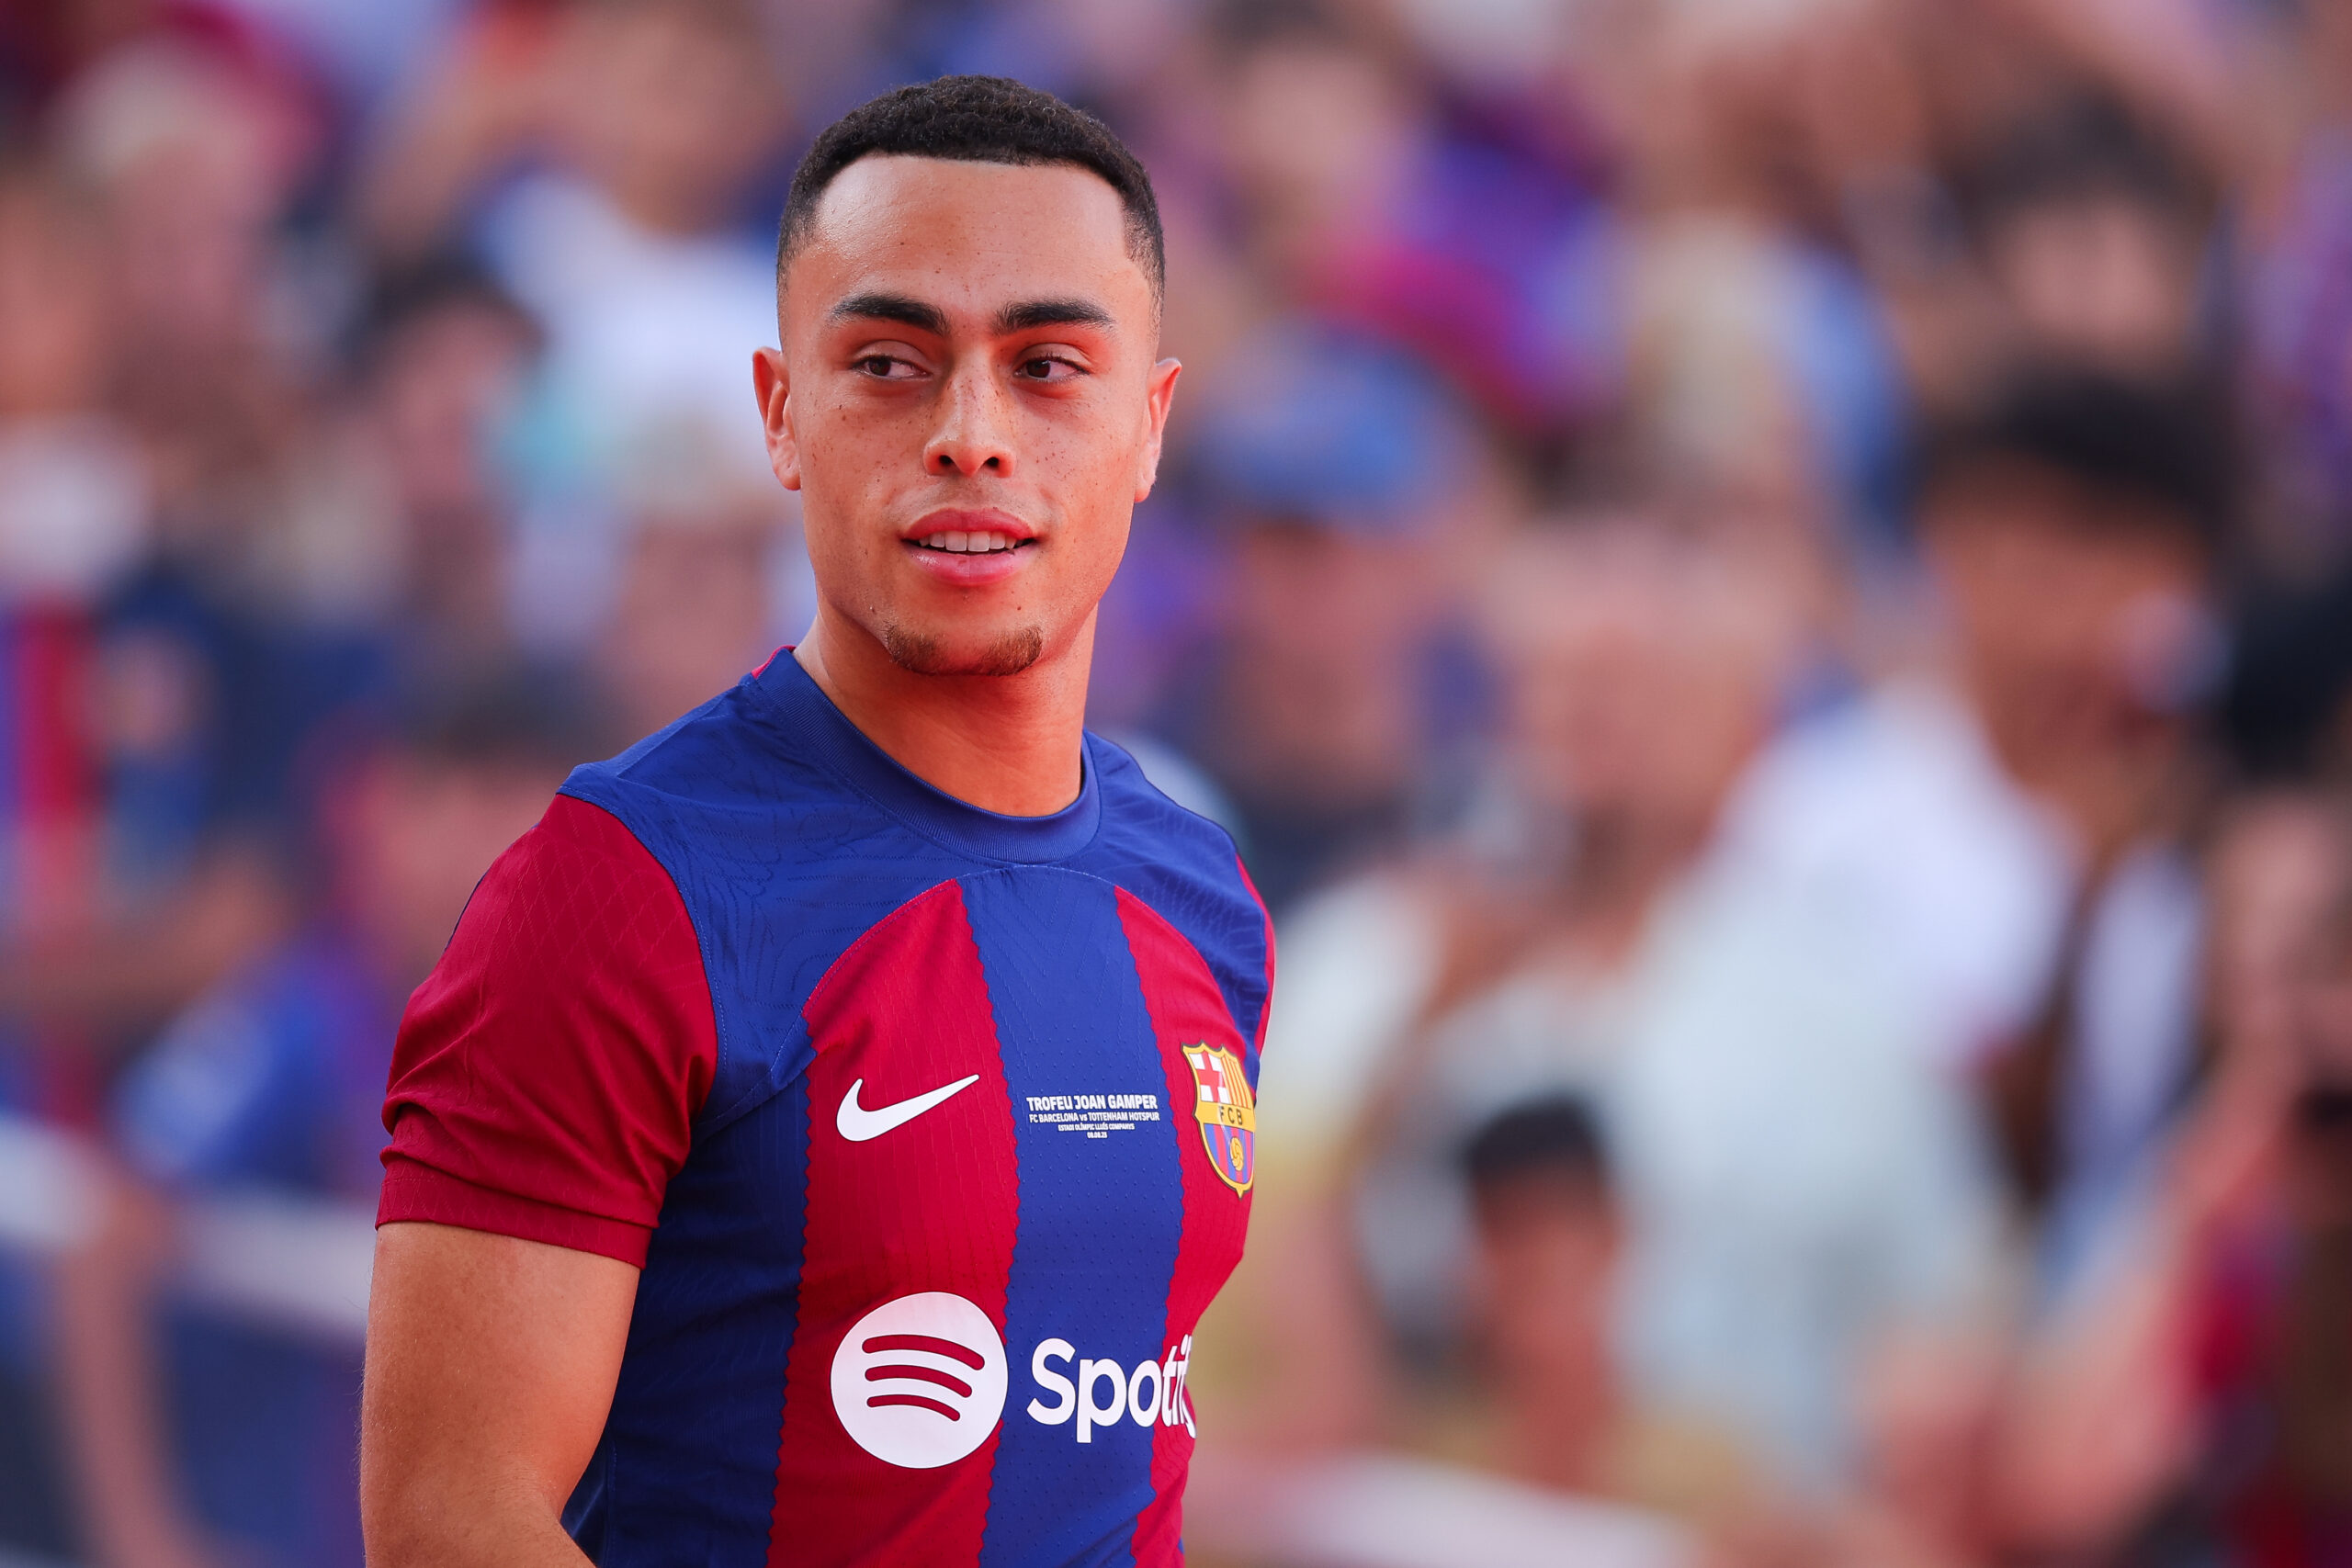 BARCELONA, SPAIN - AUGUST 08: Sergiño Dest of FC Barcelona waves the supporters during the presentation prior to the Joan Gamper Trophy match between FC Barcelona and Tottenham Hotspur at Estadi Olimpic Lluis Companys on August 08, 2023 in Barcelona, Spain.